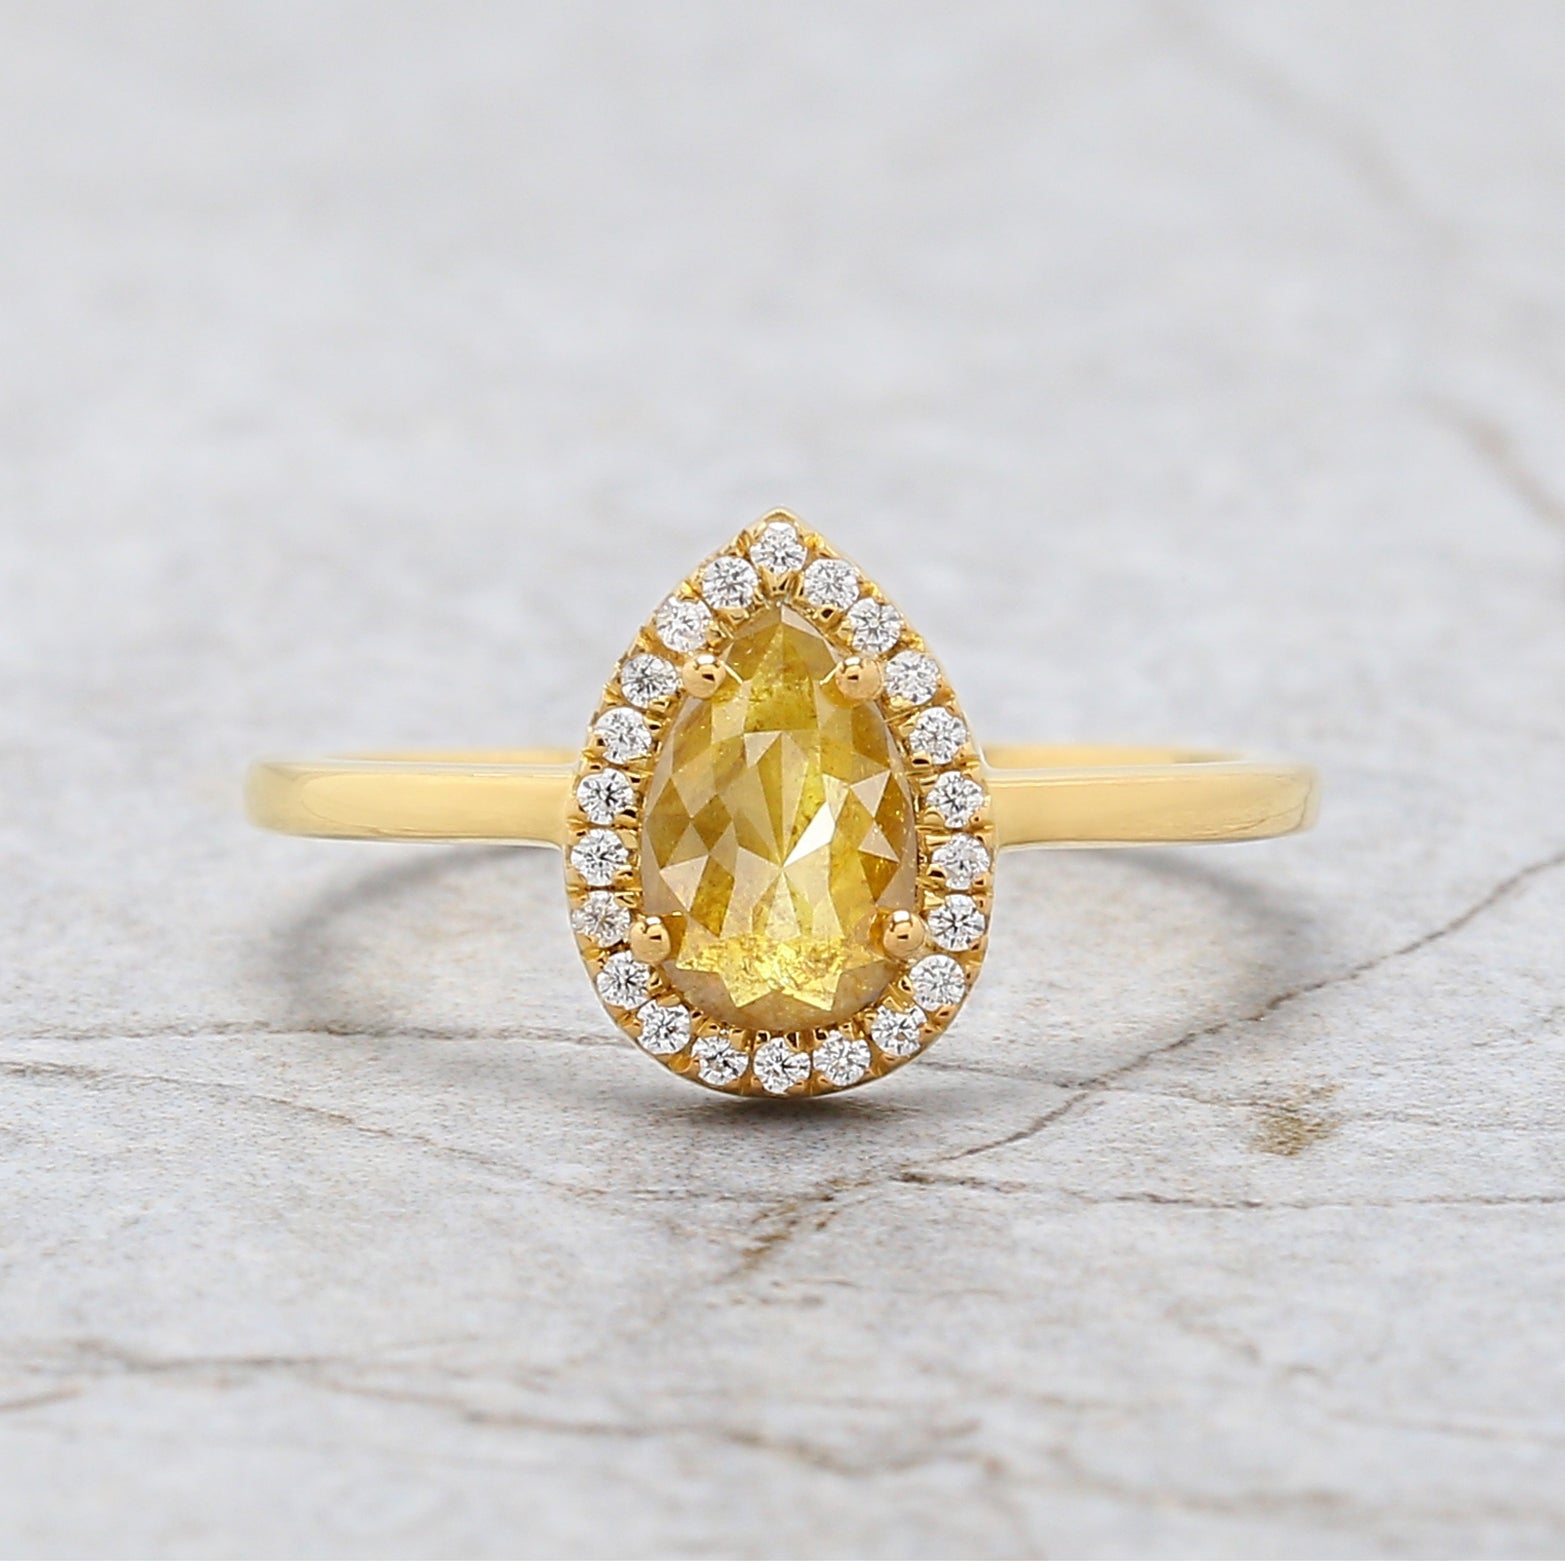 Pear Cut Yellow Color Diamond Ring 0.55 Ct 7.62 MM Pear Diamond Ring 14K Solid Yellow Gold Silver Pear Engagement Ring Gift For Her QK2580